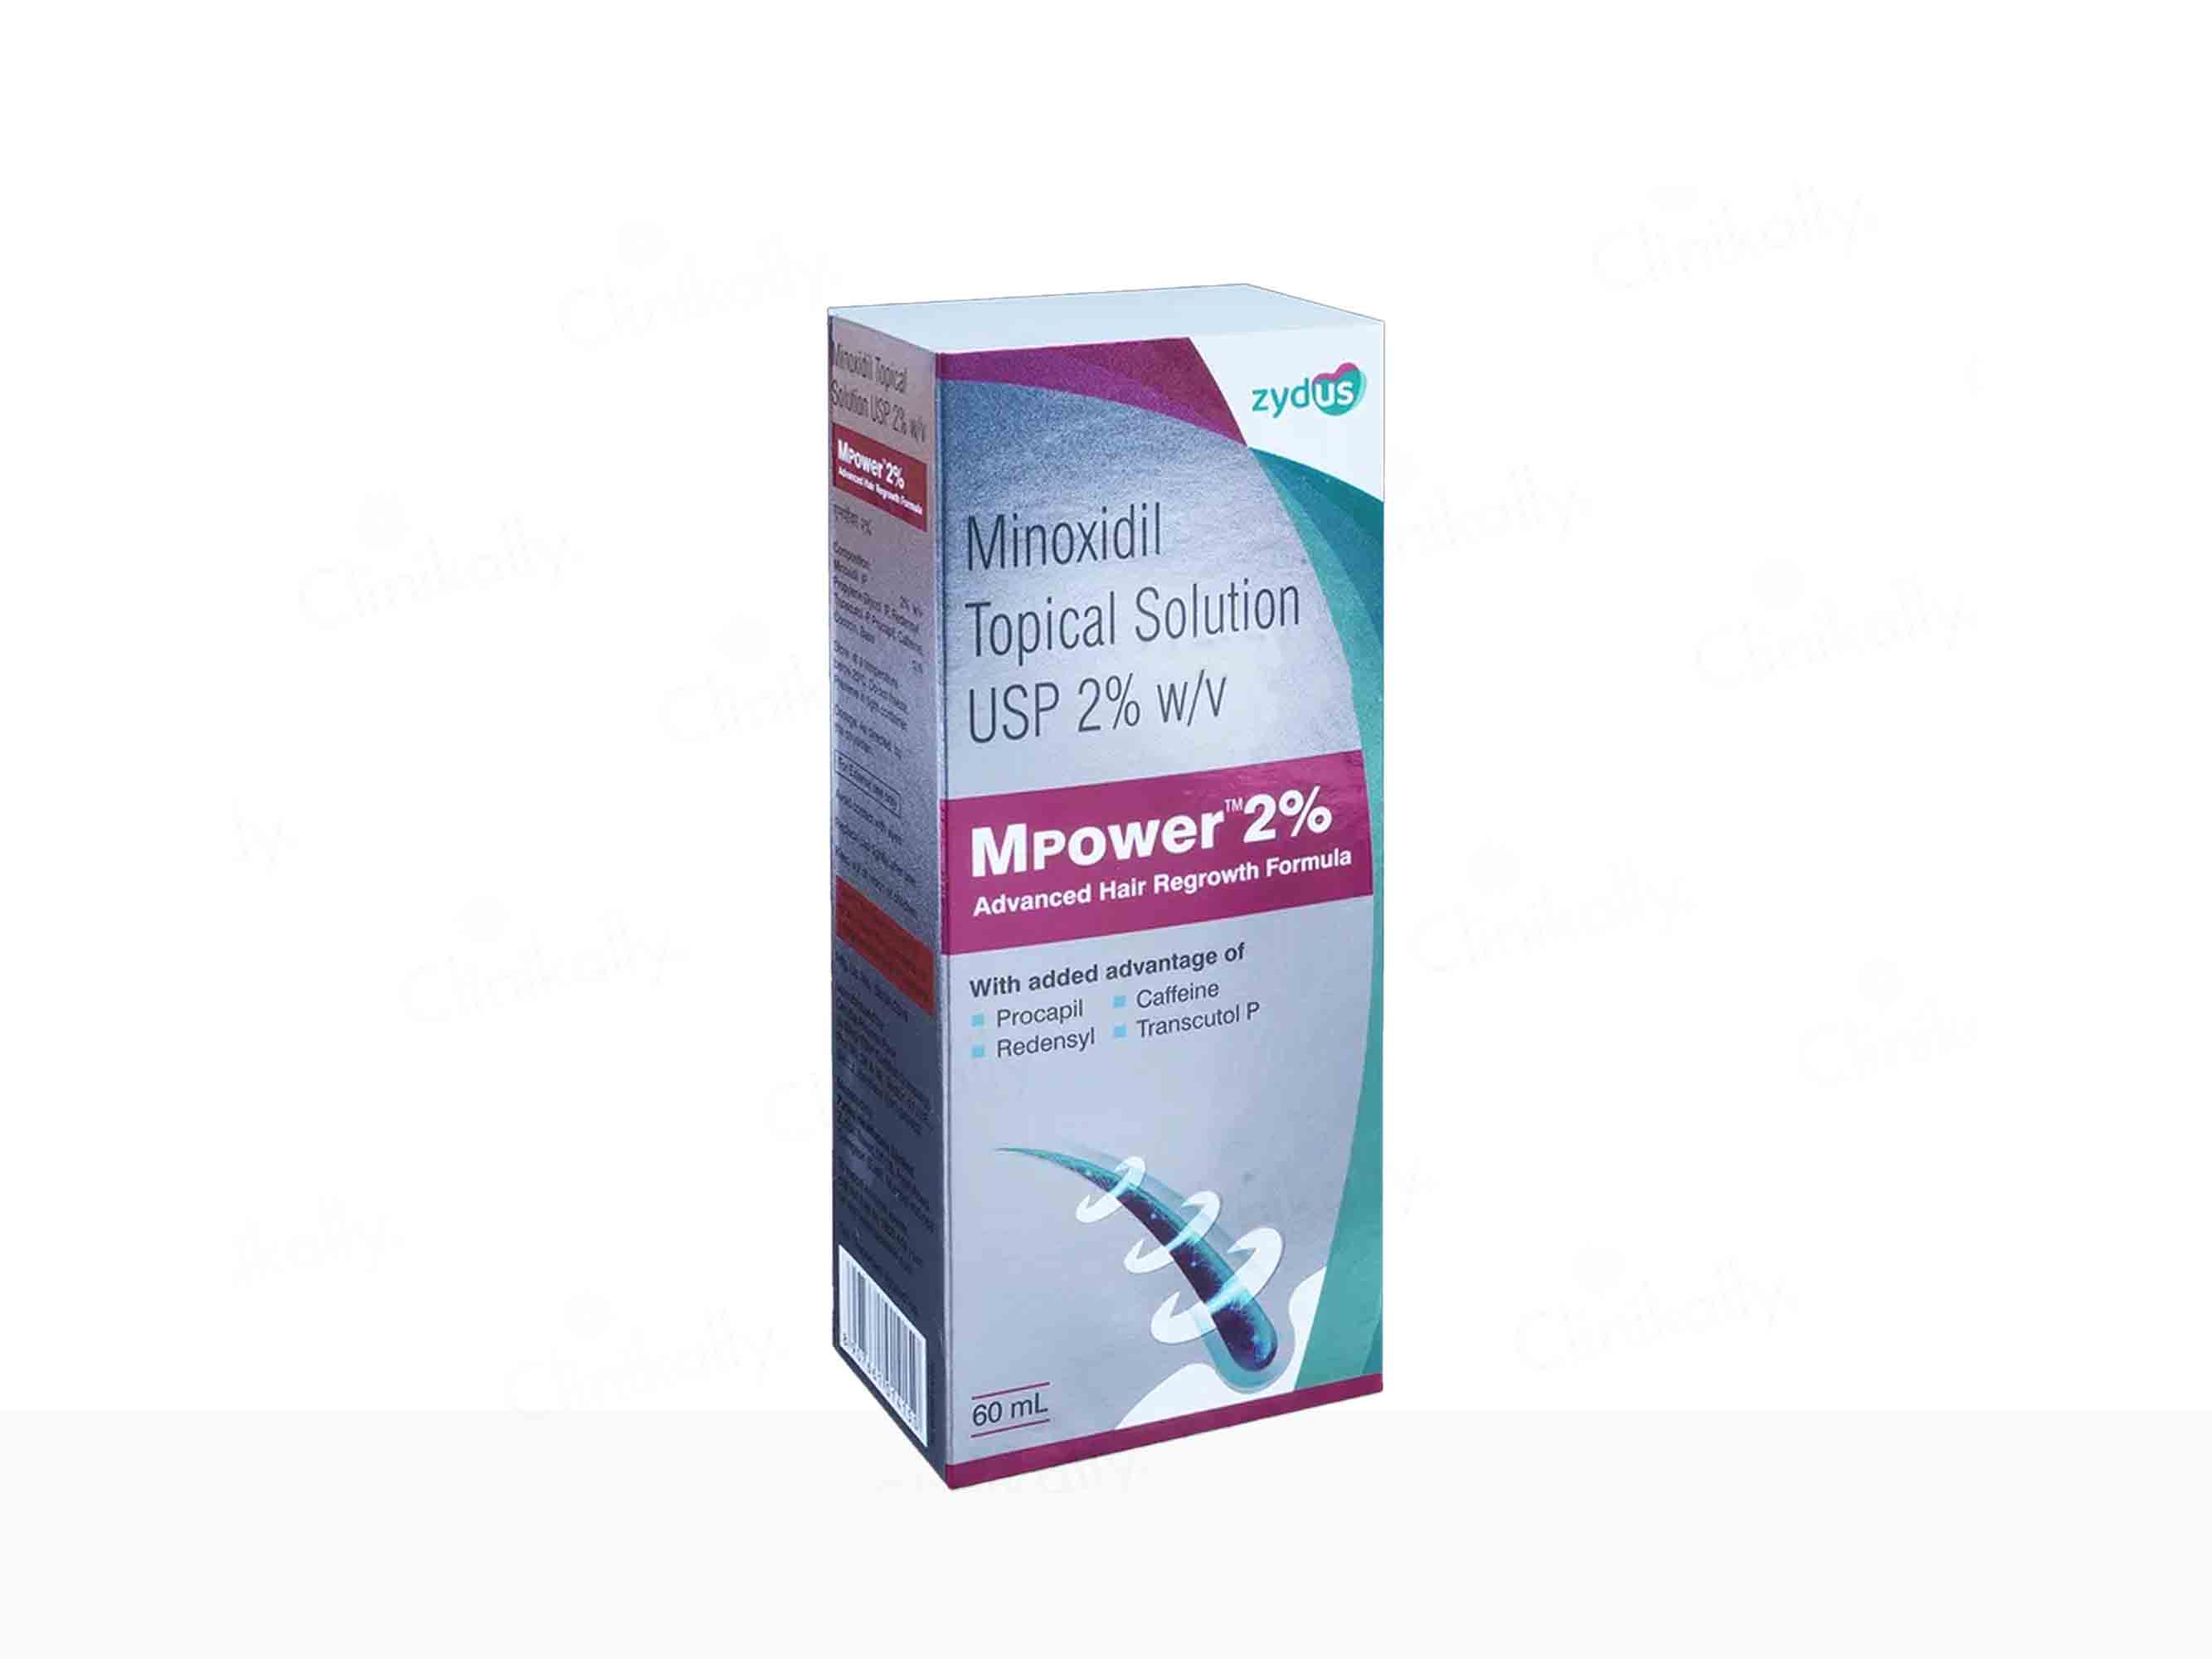 MPower 2% Topical Solution